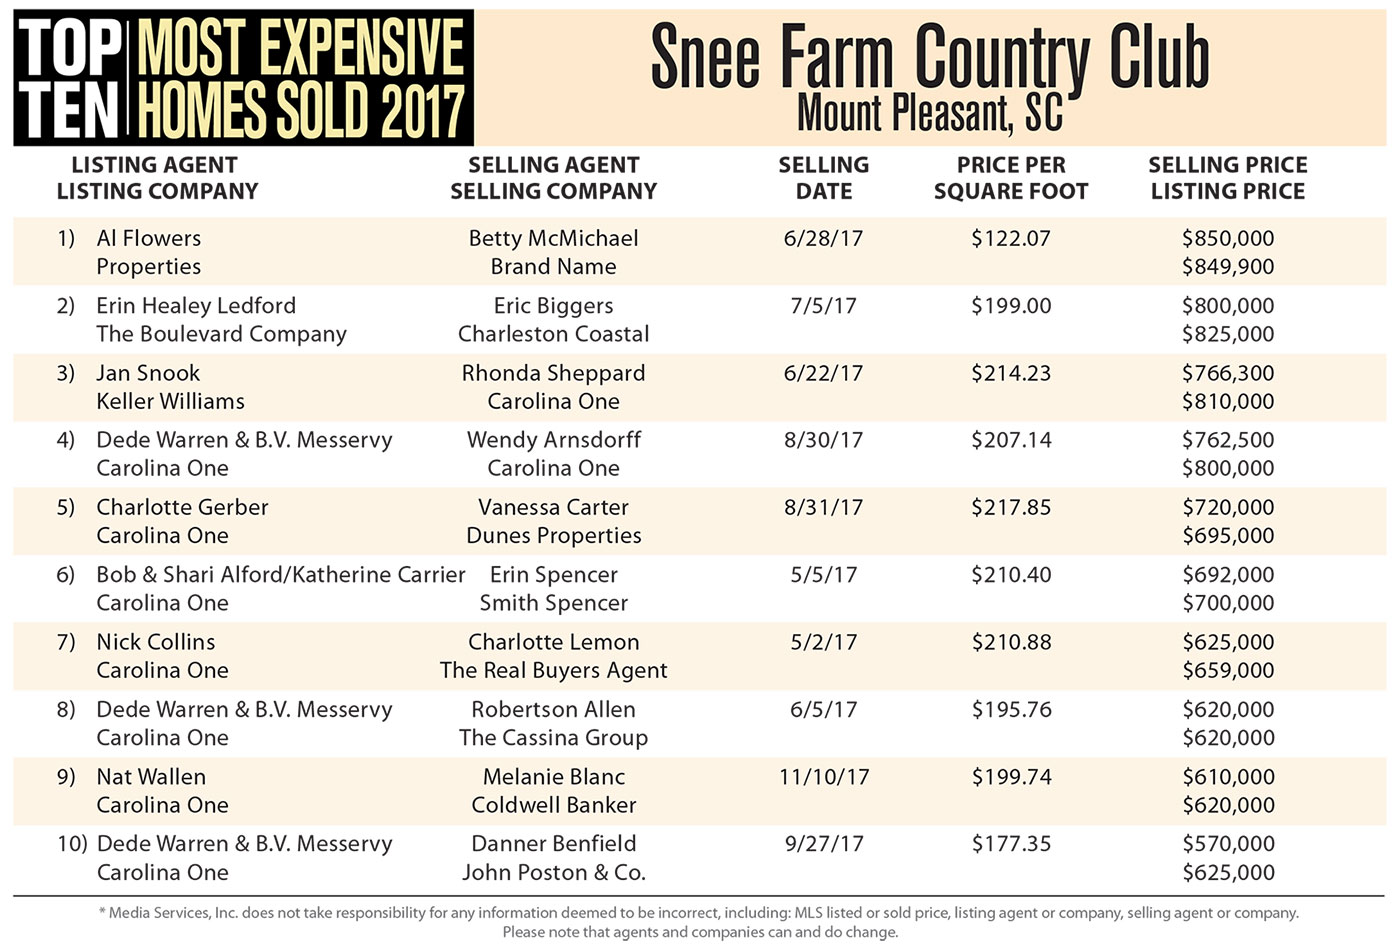 Snee Farm Country Club - Top Ten Most Expensive Homes Sold in 2017